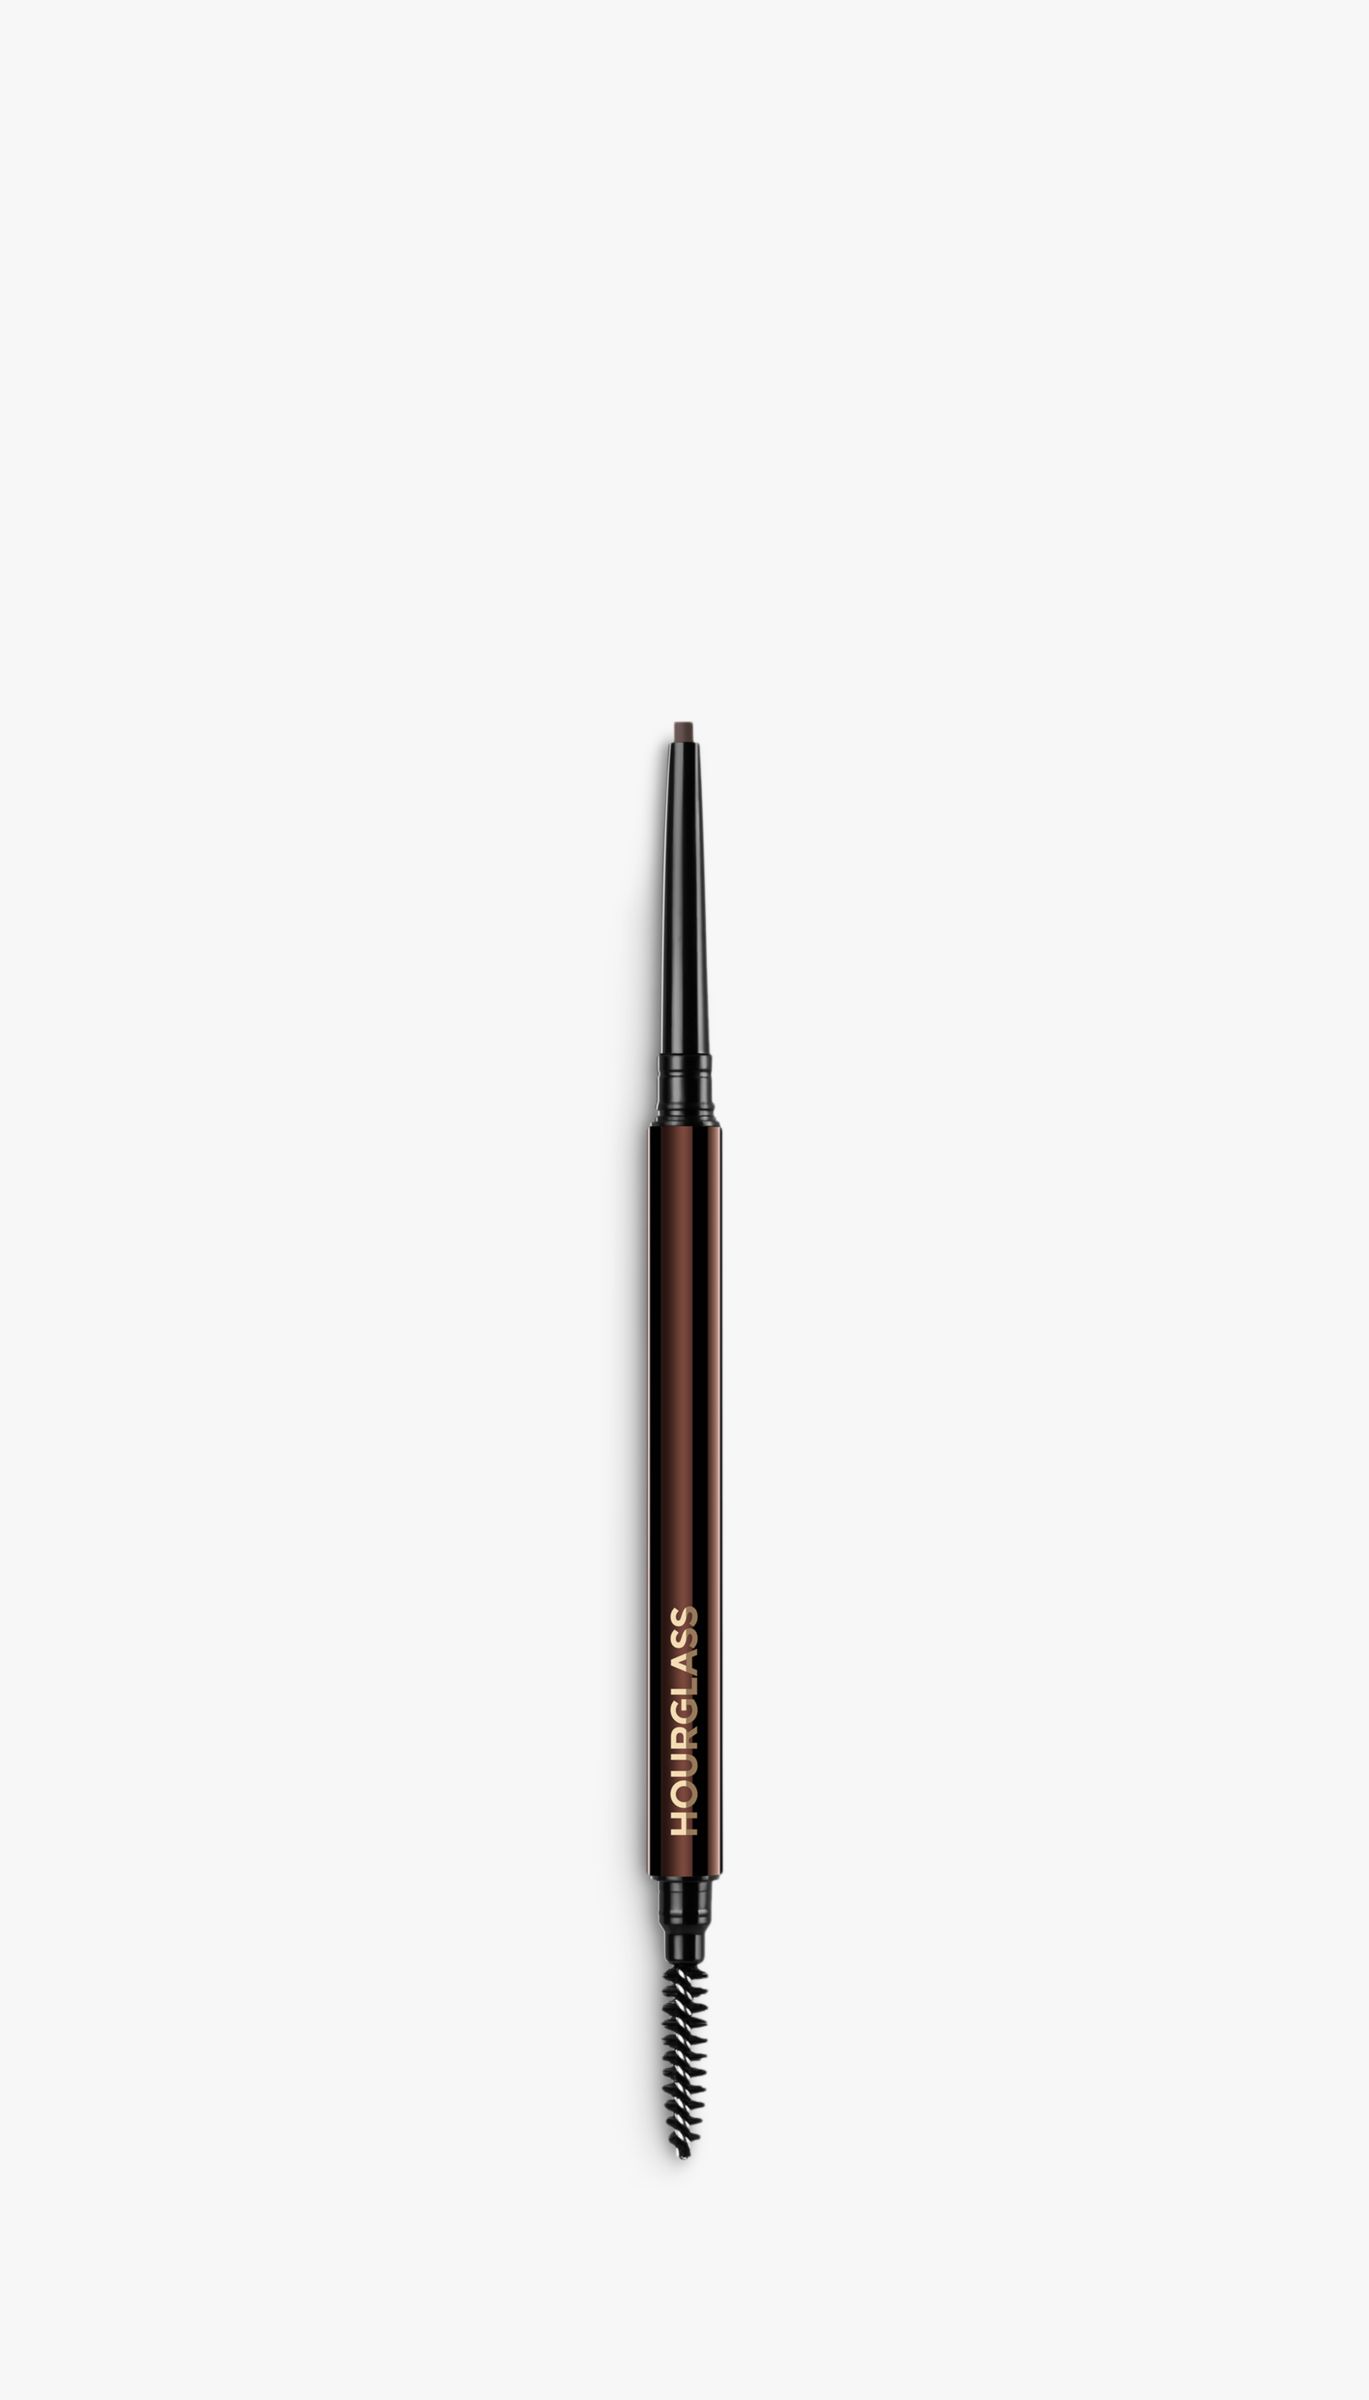 Hourglass Arch™ Brow Micro Sculpting Pencil, Ash